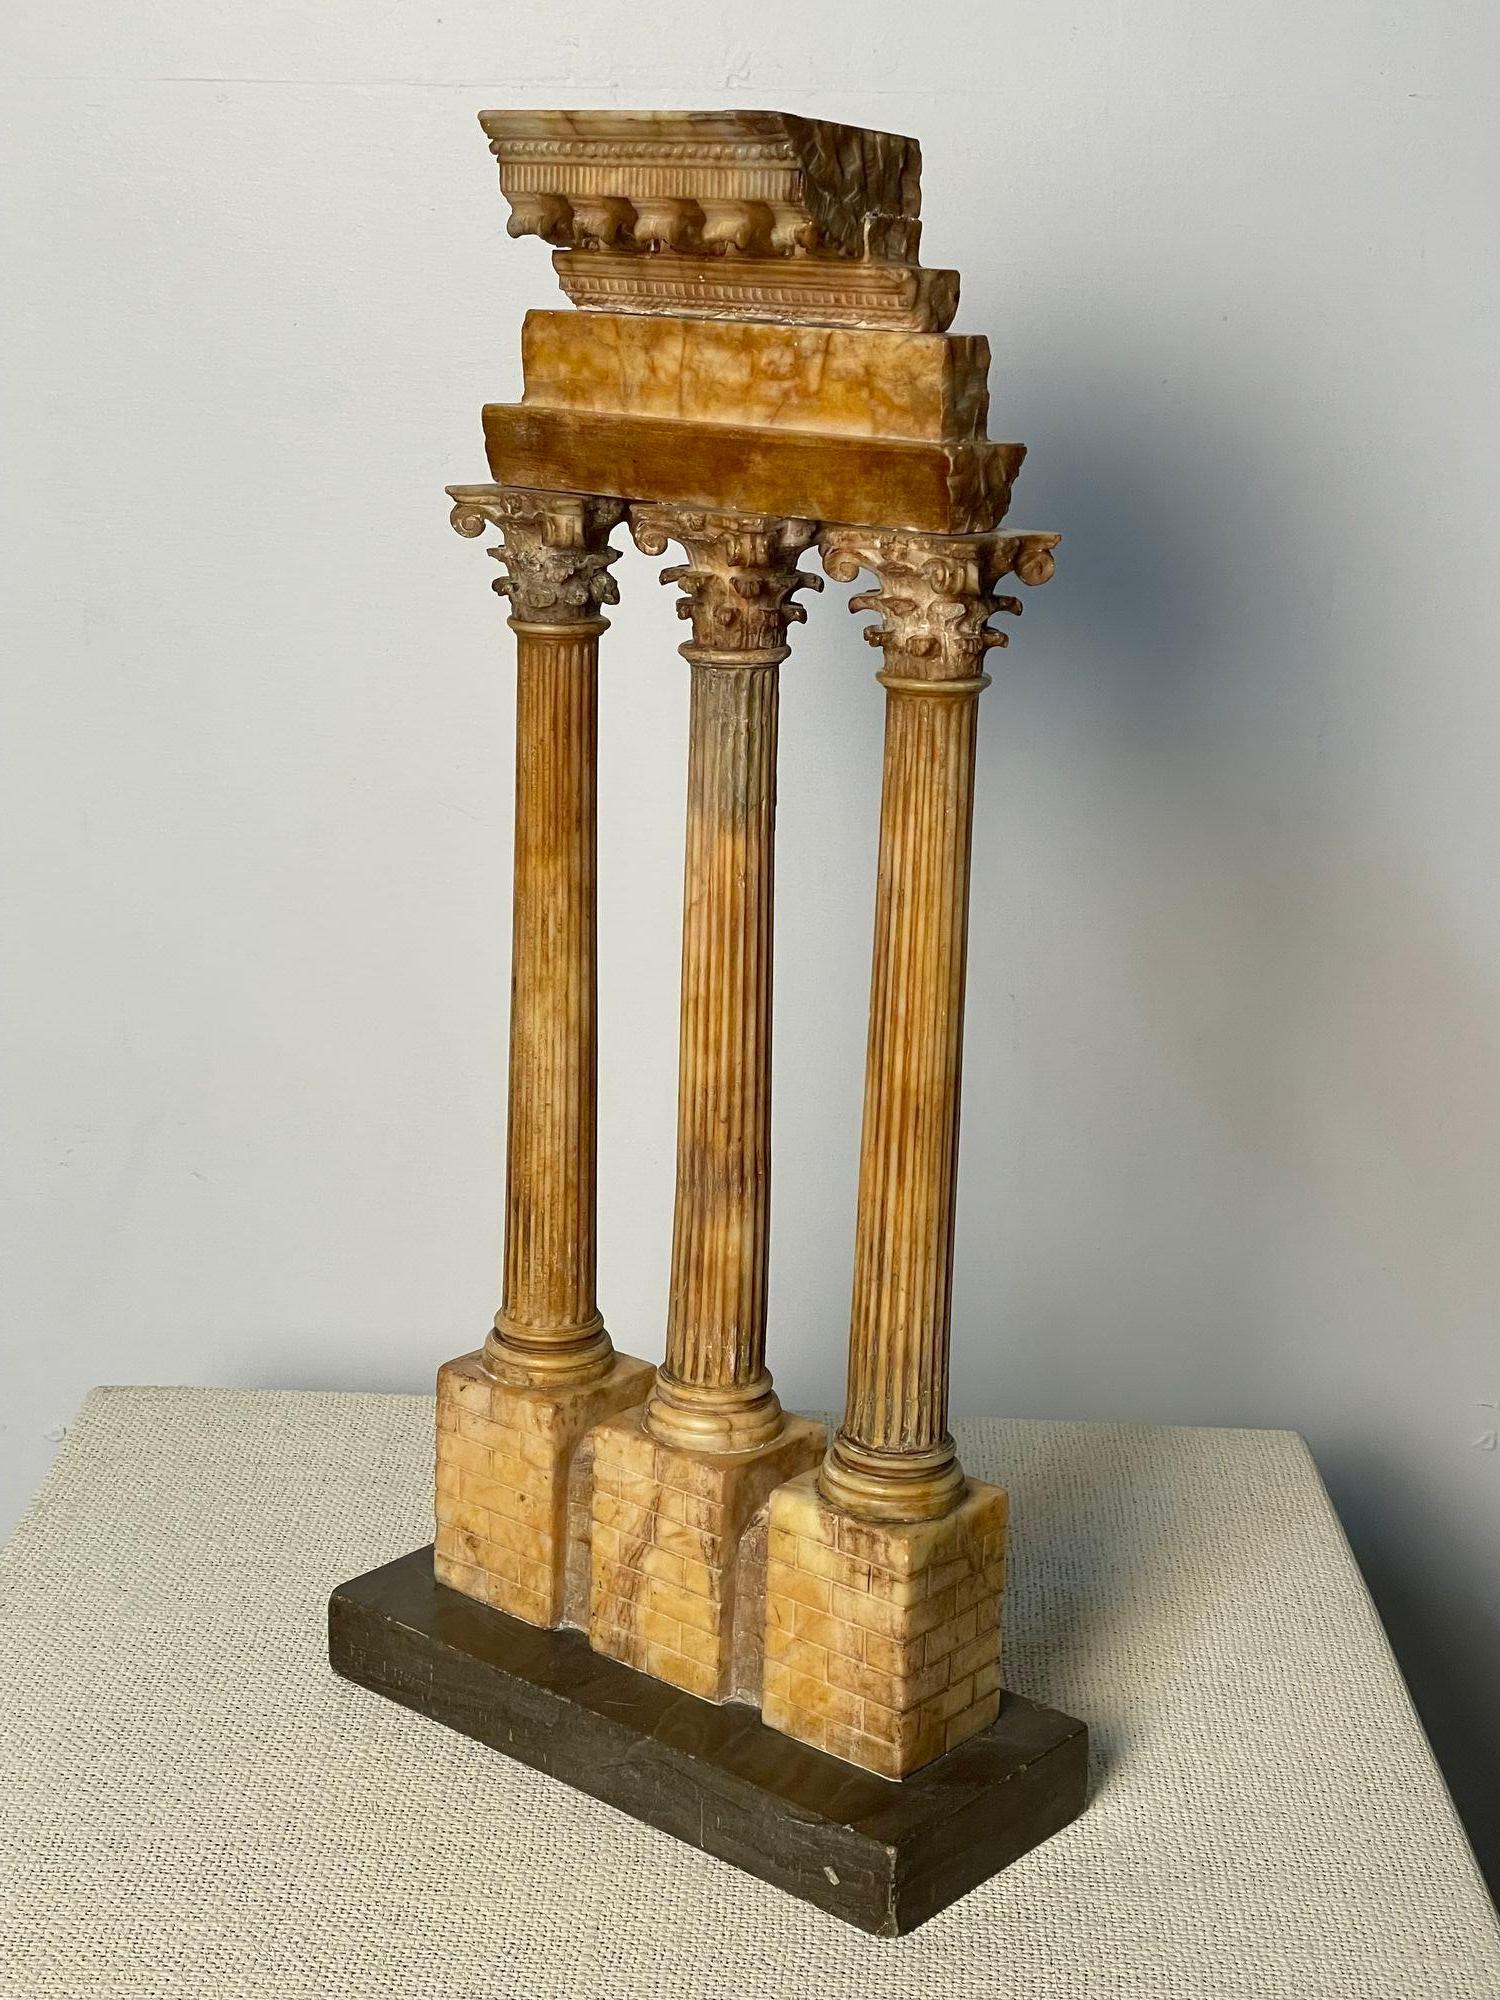 Italian Grand Tour Corinthian Style Stone / Marble Model of Ruins, Sienna Marble, Statue / Sculpture. Grand Tour Giallo Antico Marble Model of the Temple of Castor & Pollux. 
A very fine and early Roman neoclassical period grand tour Sienna marble